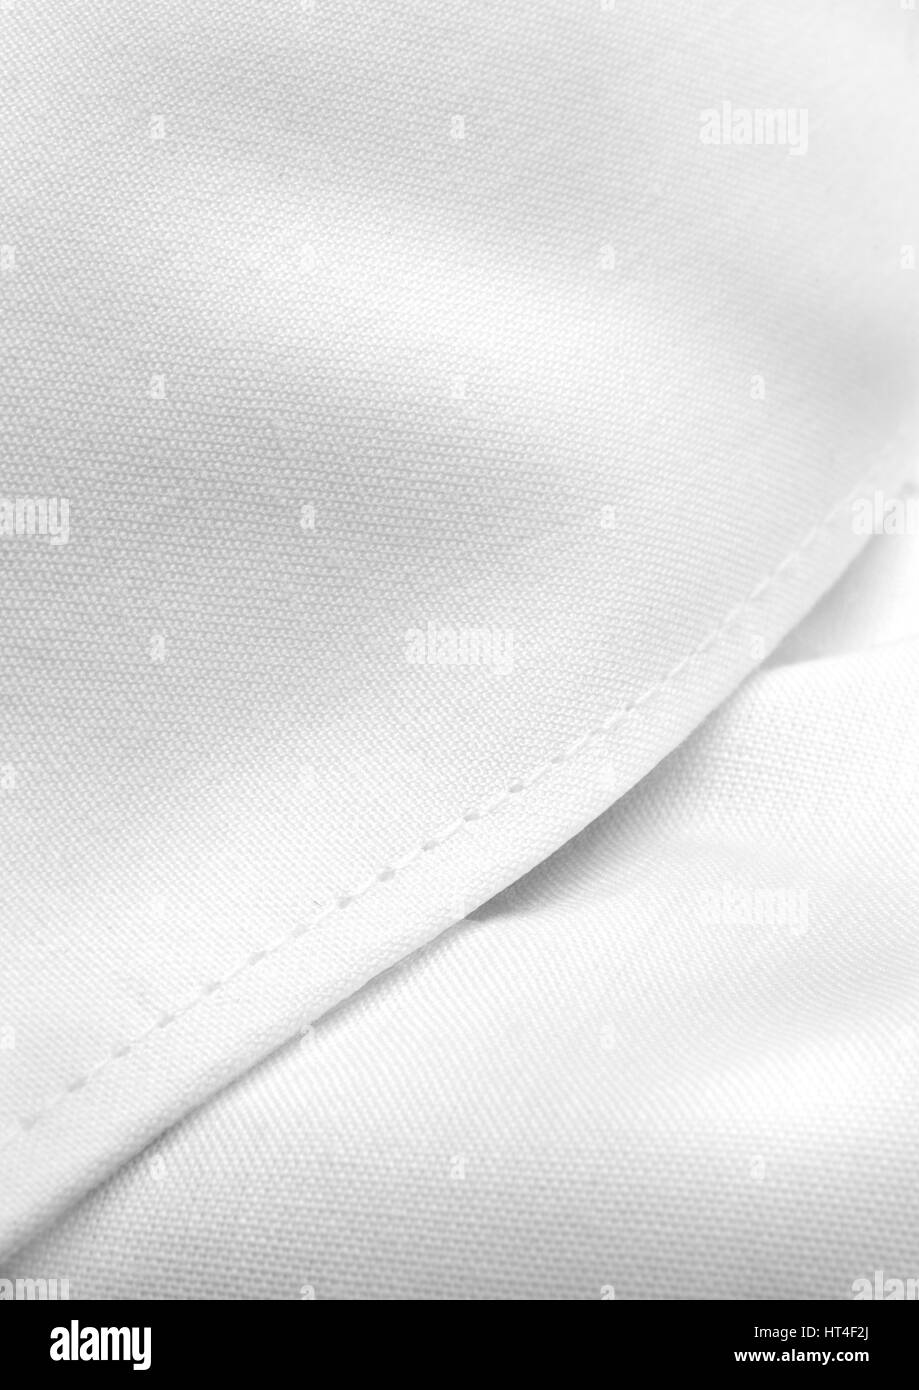 White Cotton Shirt with texture and soft lighting Stock Photo